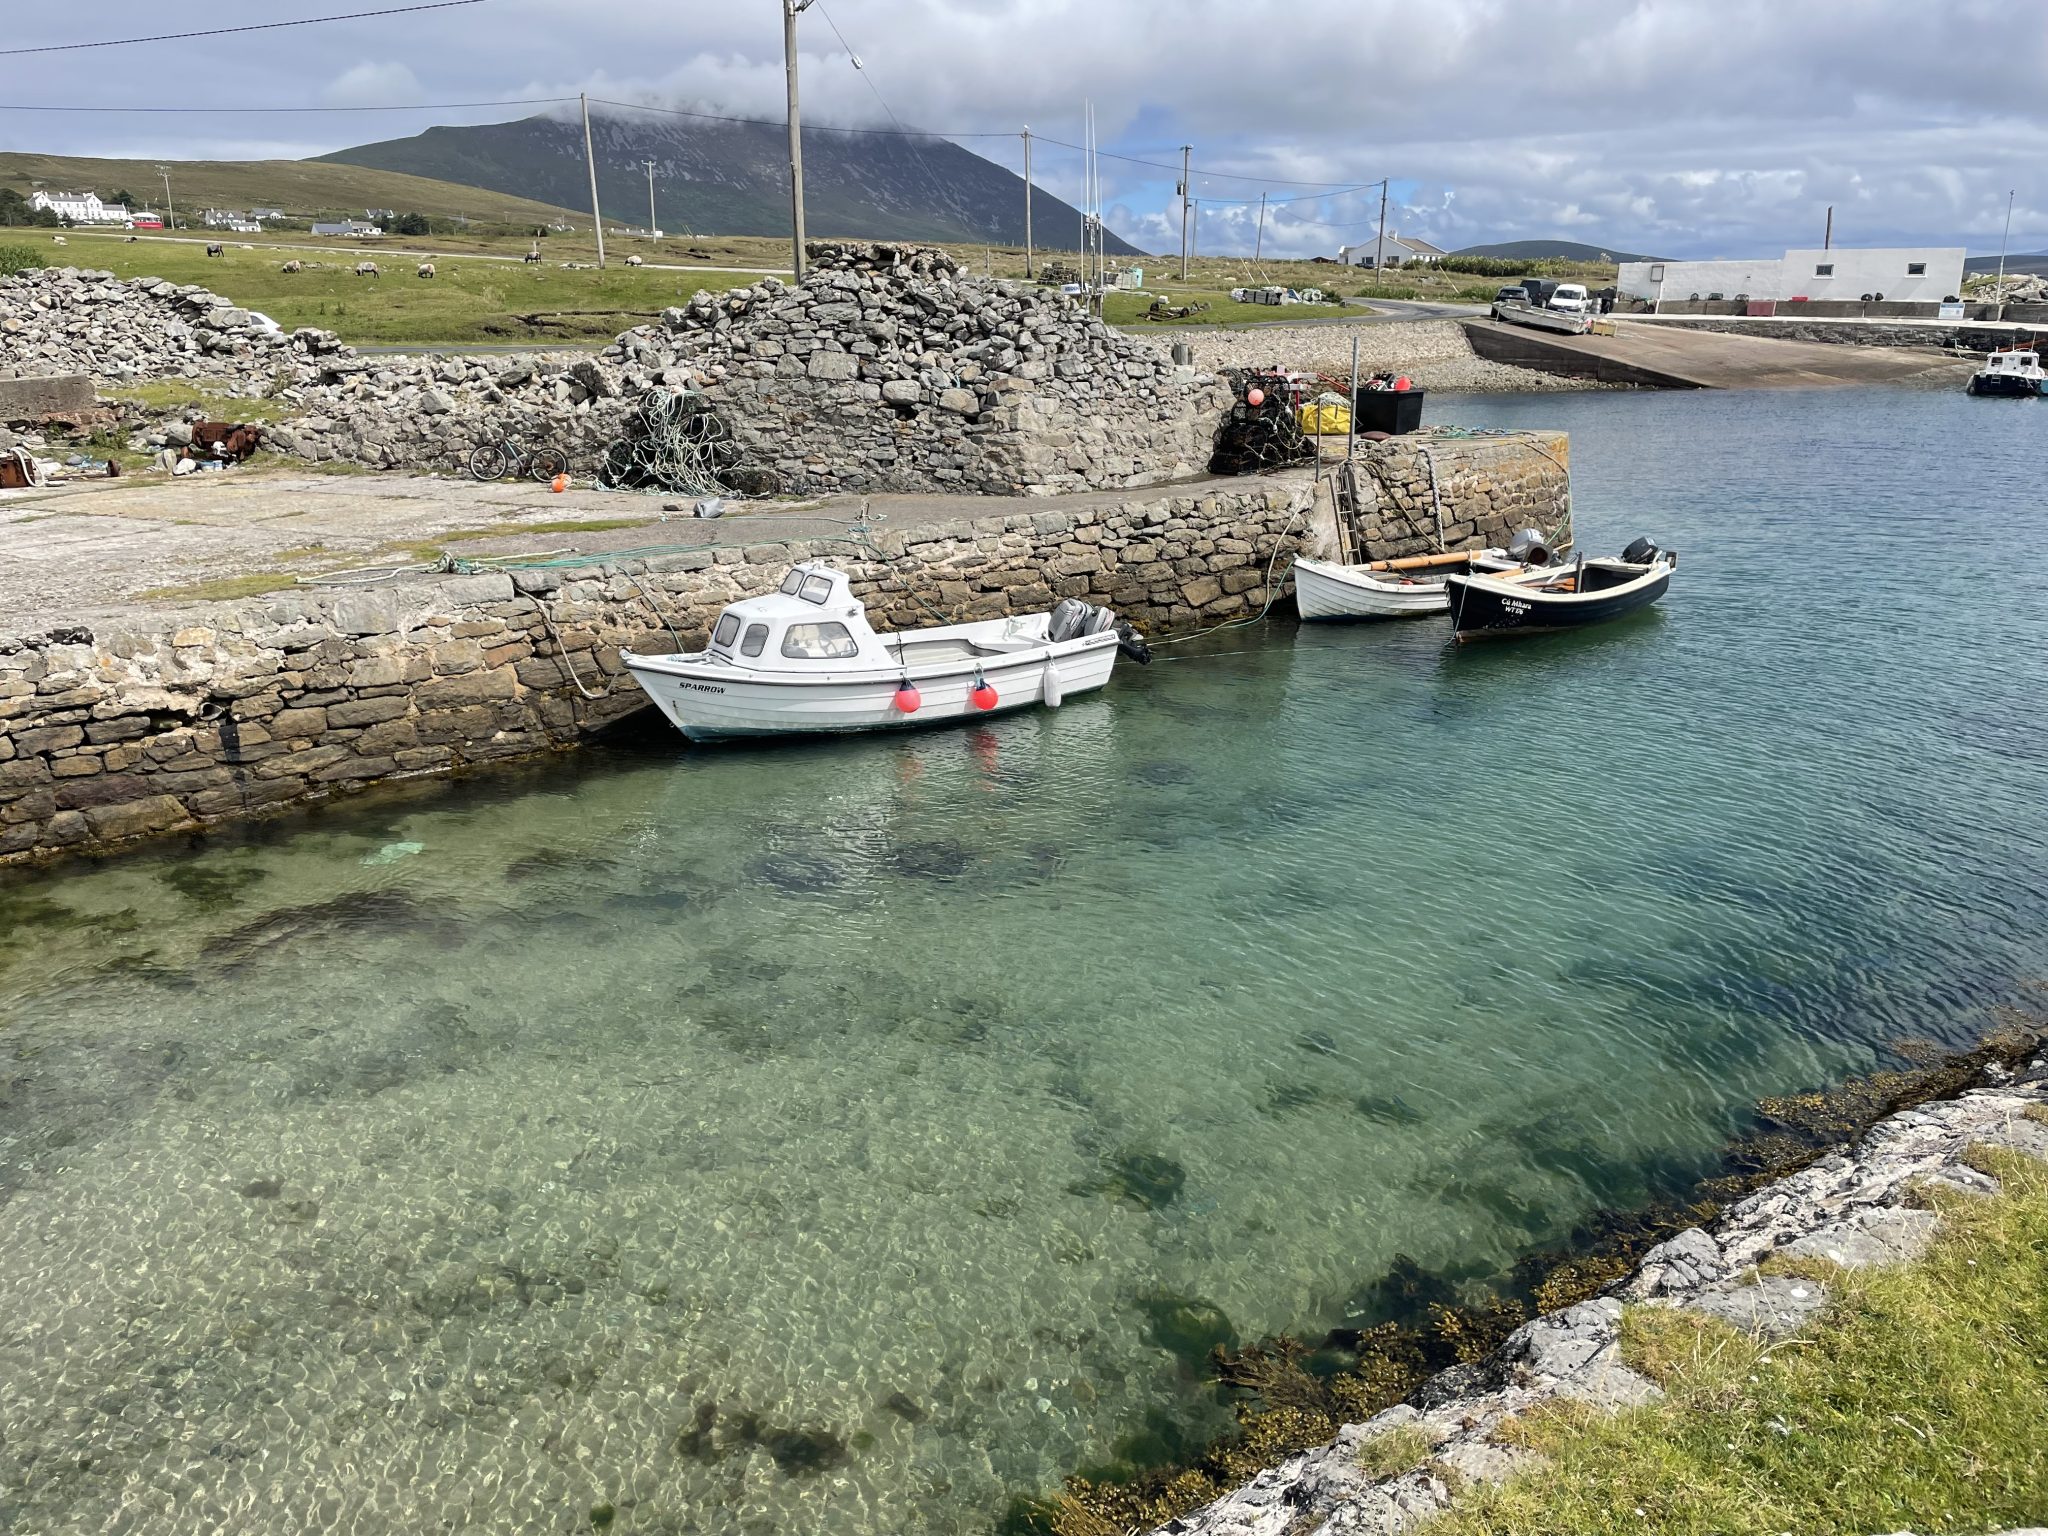 View of a small fishing harbour in Achill Island, Ireland